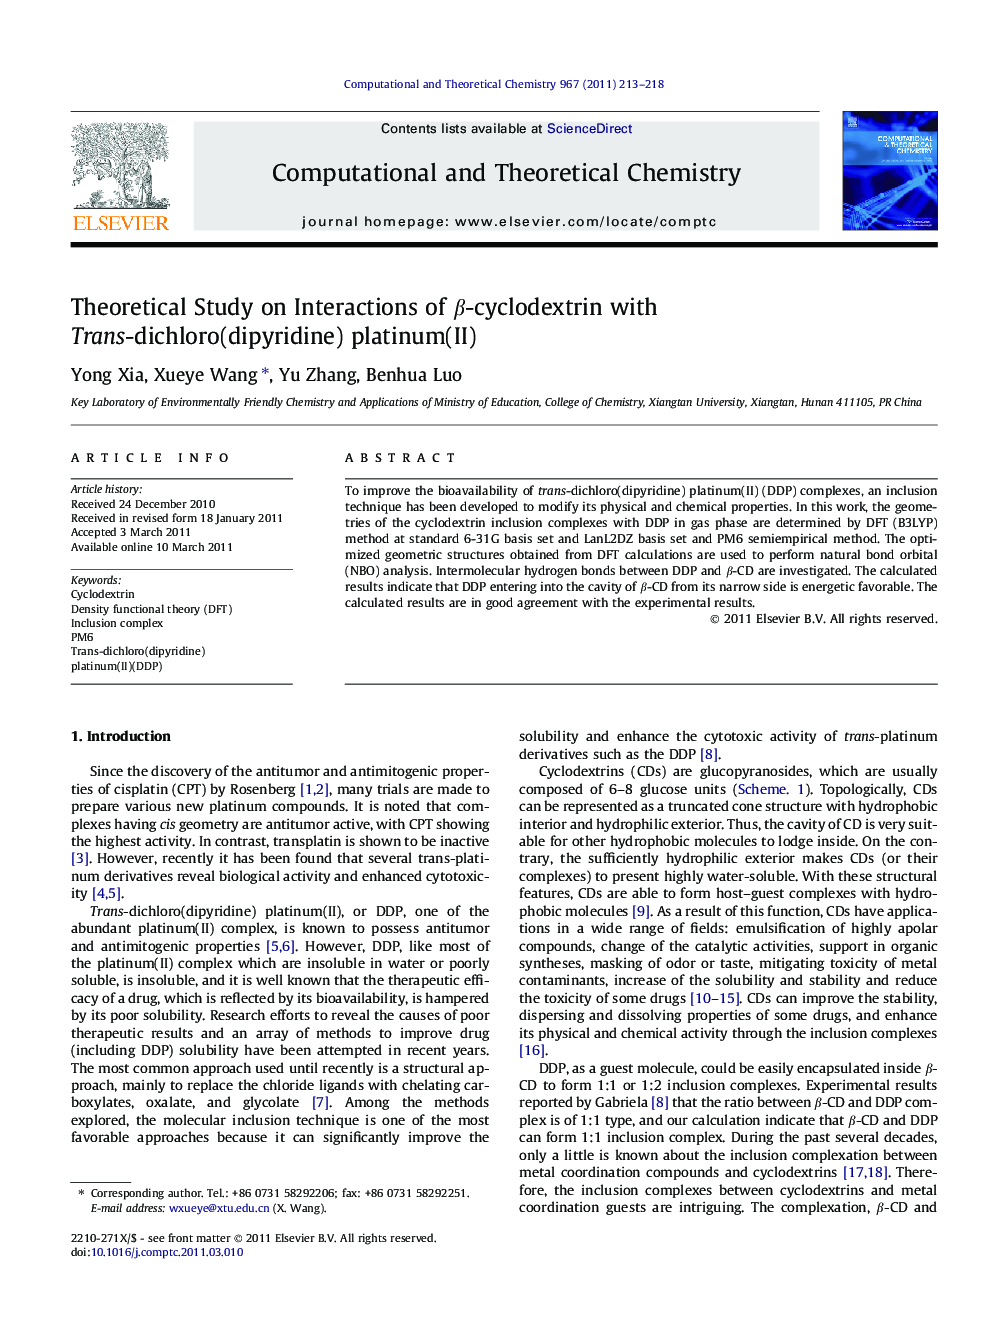 Theoretical Study on Interactions of Î²-cyclodextrin with Trans-dichloro(dipyridine) platinum(II)